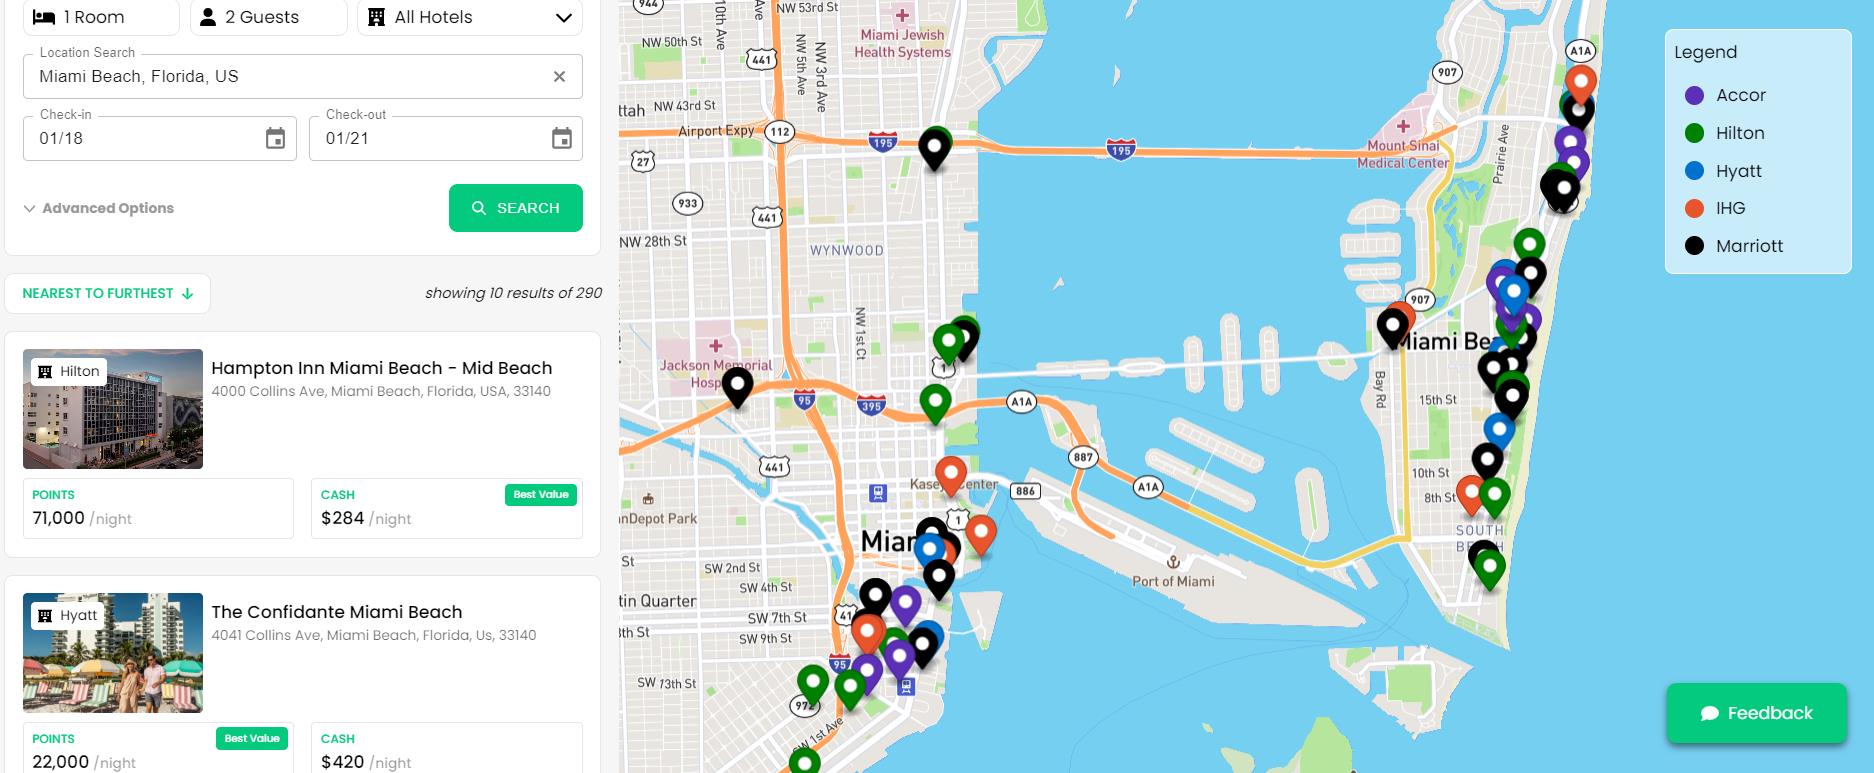 Search for hotels on Awayz website, showing different colored pins of available hotels on a map of Miami, Florida